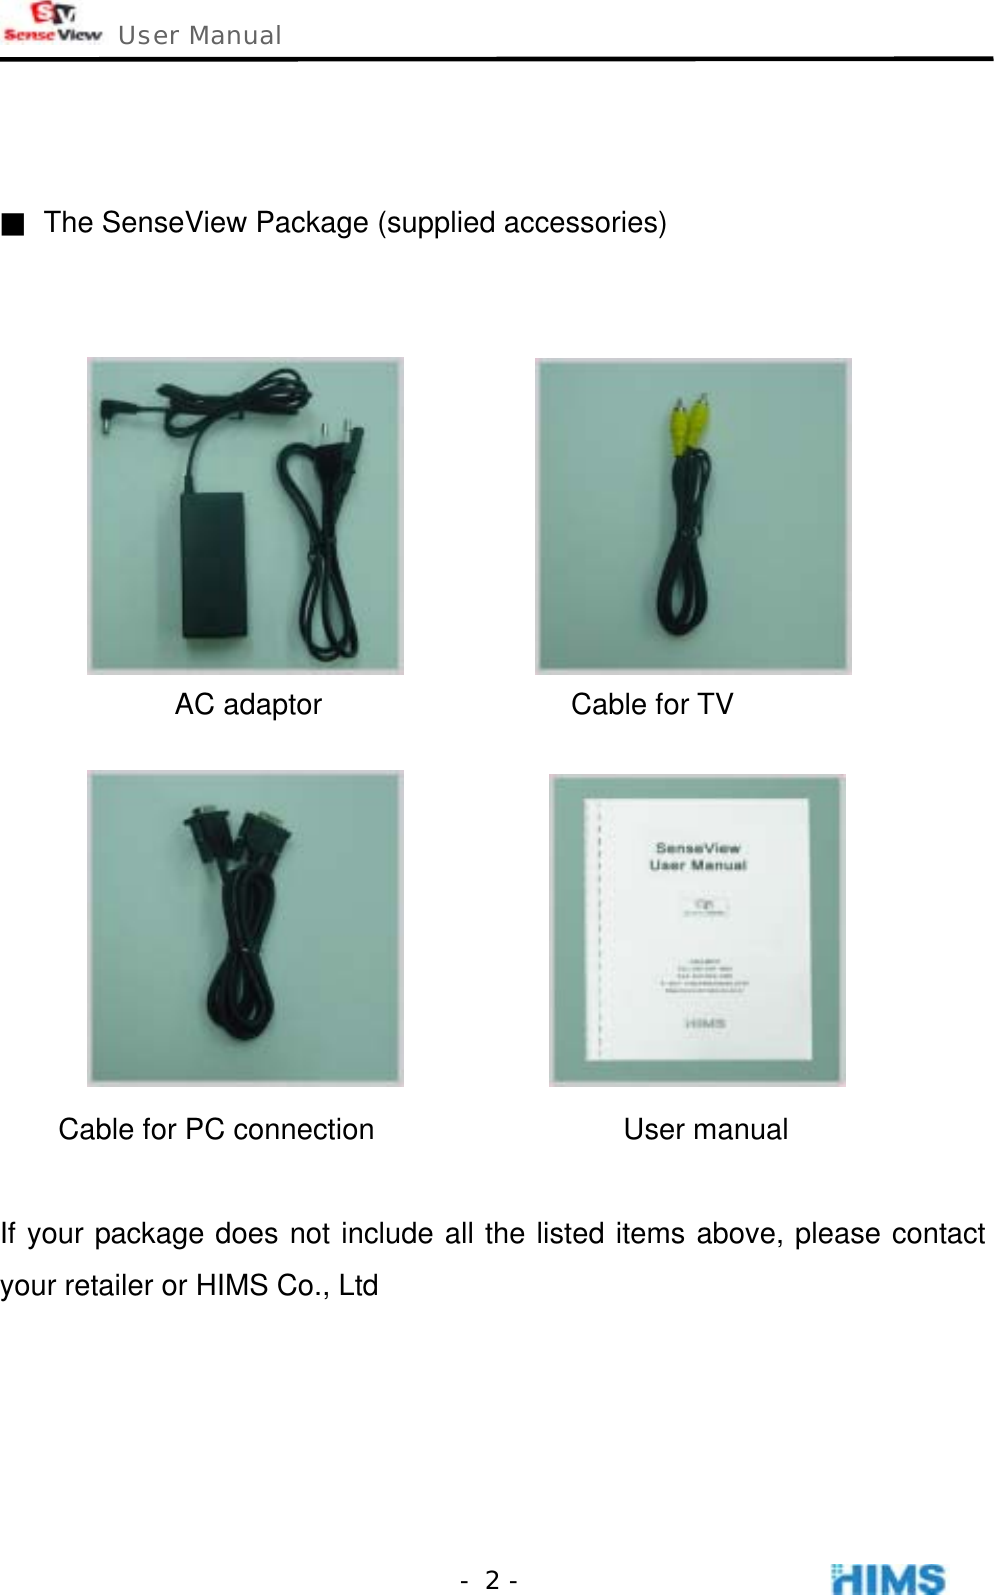  User Manual    - 2 -  ■  The SenseView Package (supplied accessories)              AC adaptor                 Cable for TV                  Cable for PC connection                 User manual  If your package does not include all the listed items above, please contact your retailer or HIMS Co., Ltd     